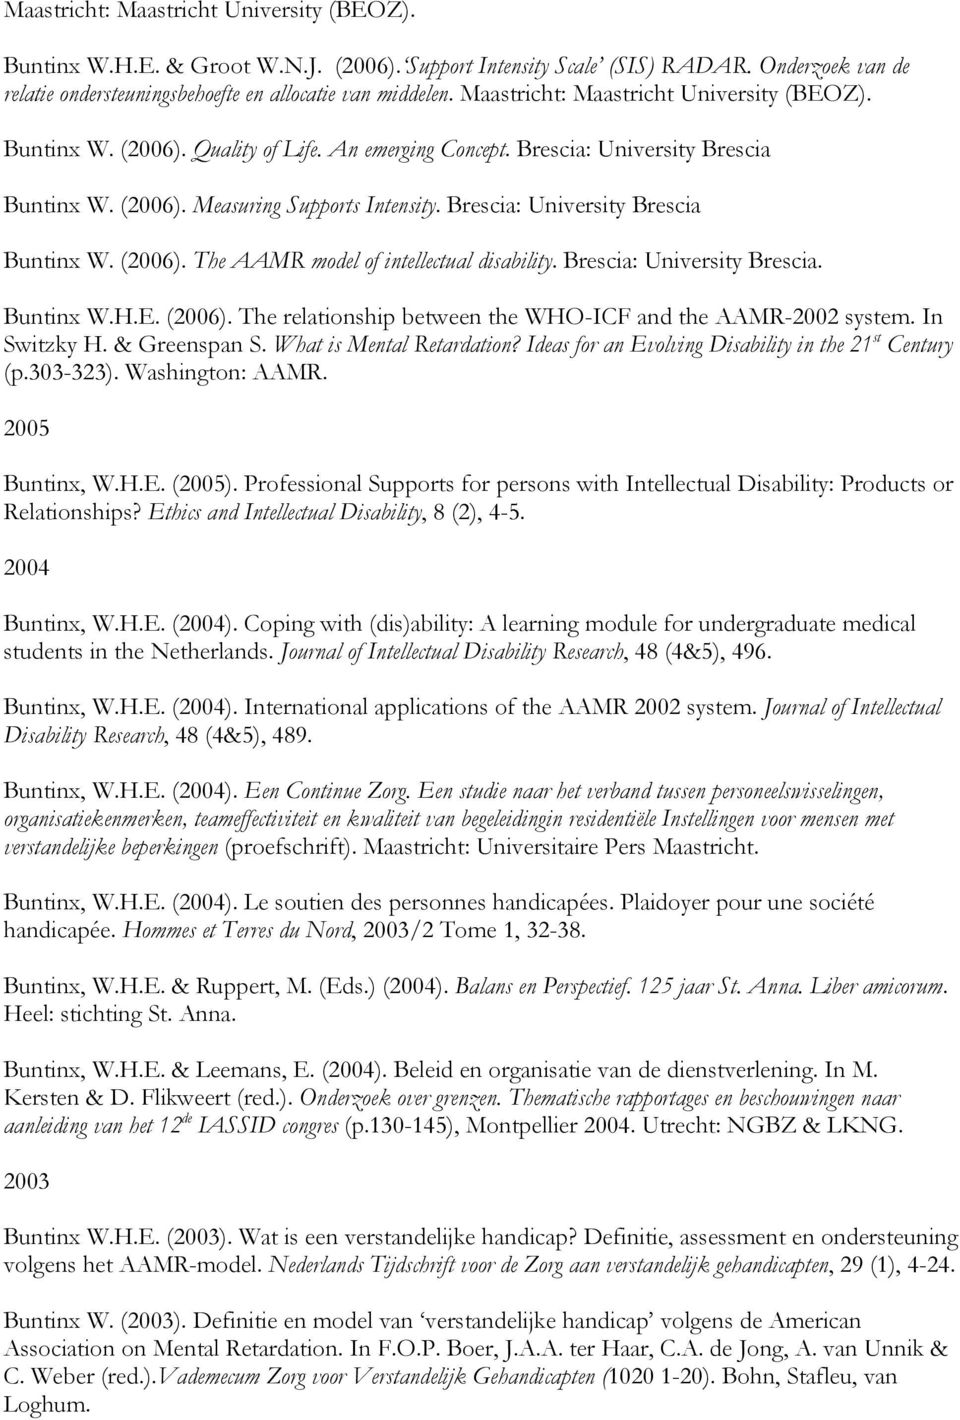 Brescia: University Brescia Buntinx W. (2006). The AAMR model of intellectual disability. Brescia: University Brescia. Buntinx W.H.E. (2006). The relationship between the WHO-ICF and the AAMR-2002 system.